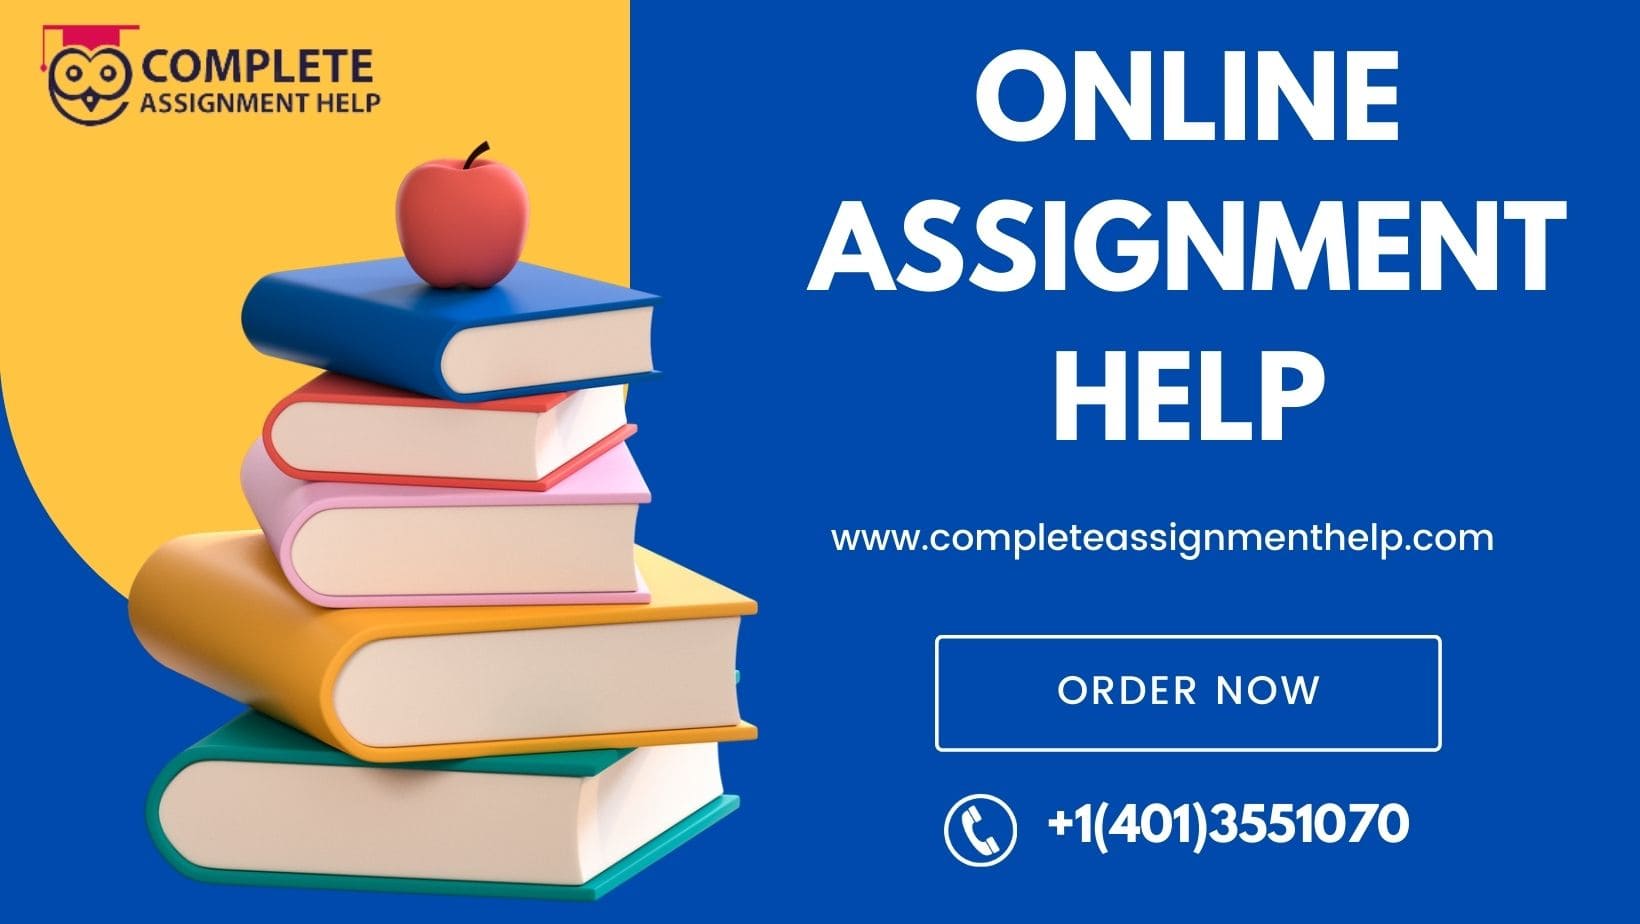 Online Assignment Help by Complete Assignment Help